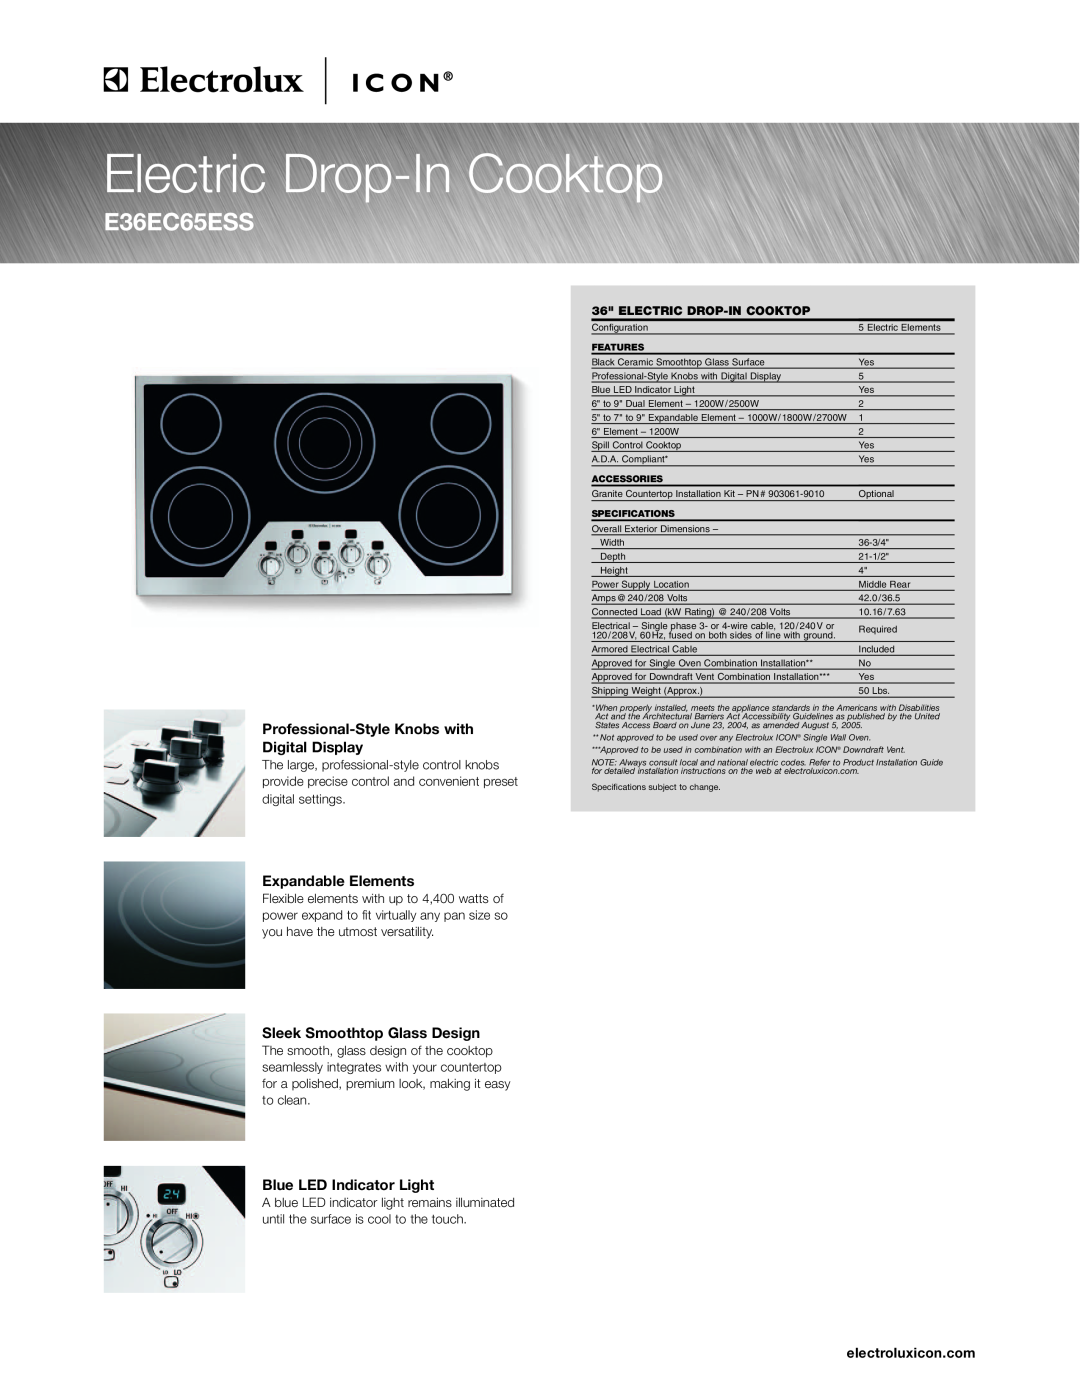 Electrolux E36EC65ESS specifications Electric Drop-In Cooktop, electroluxicon.com 